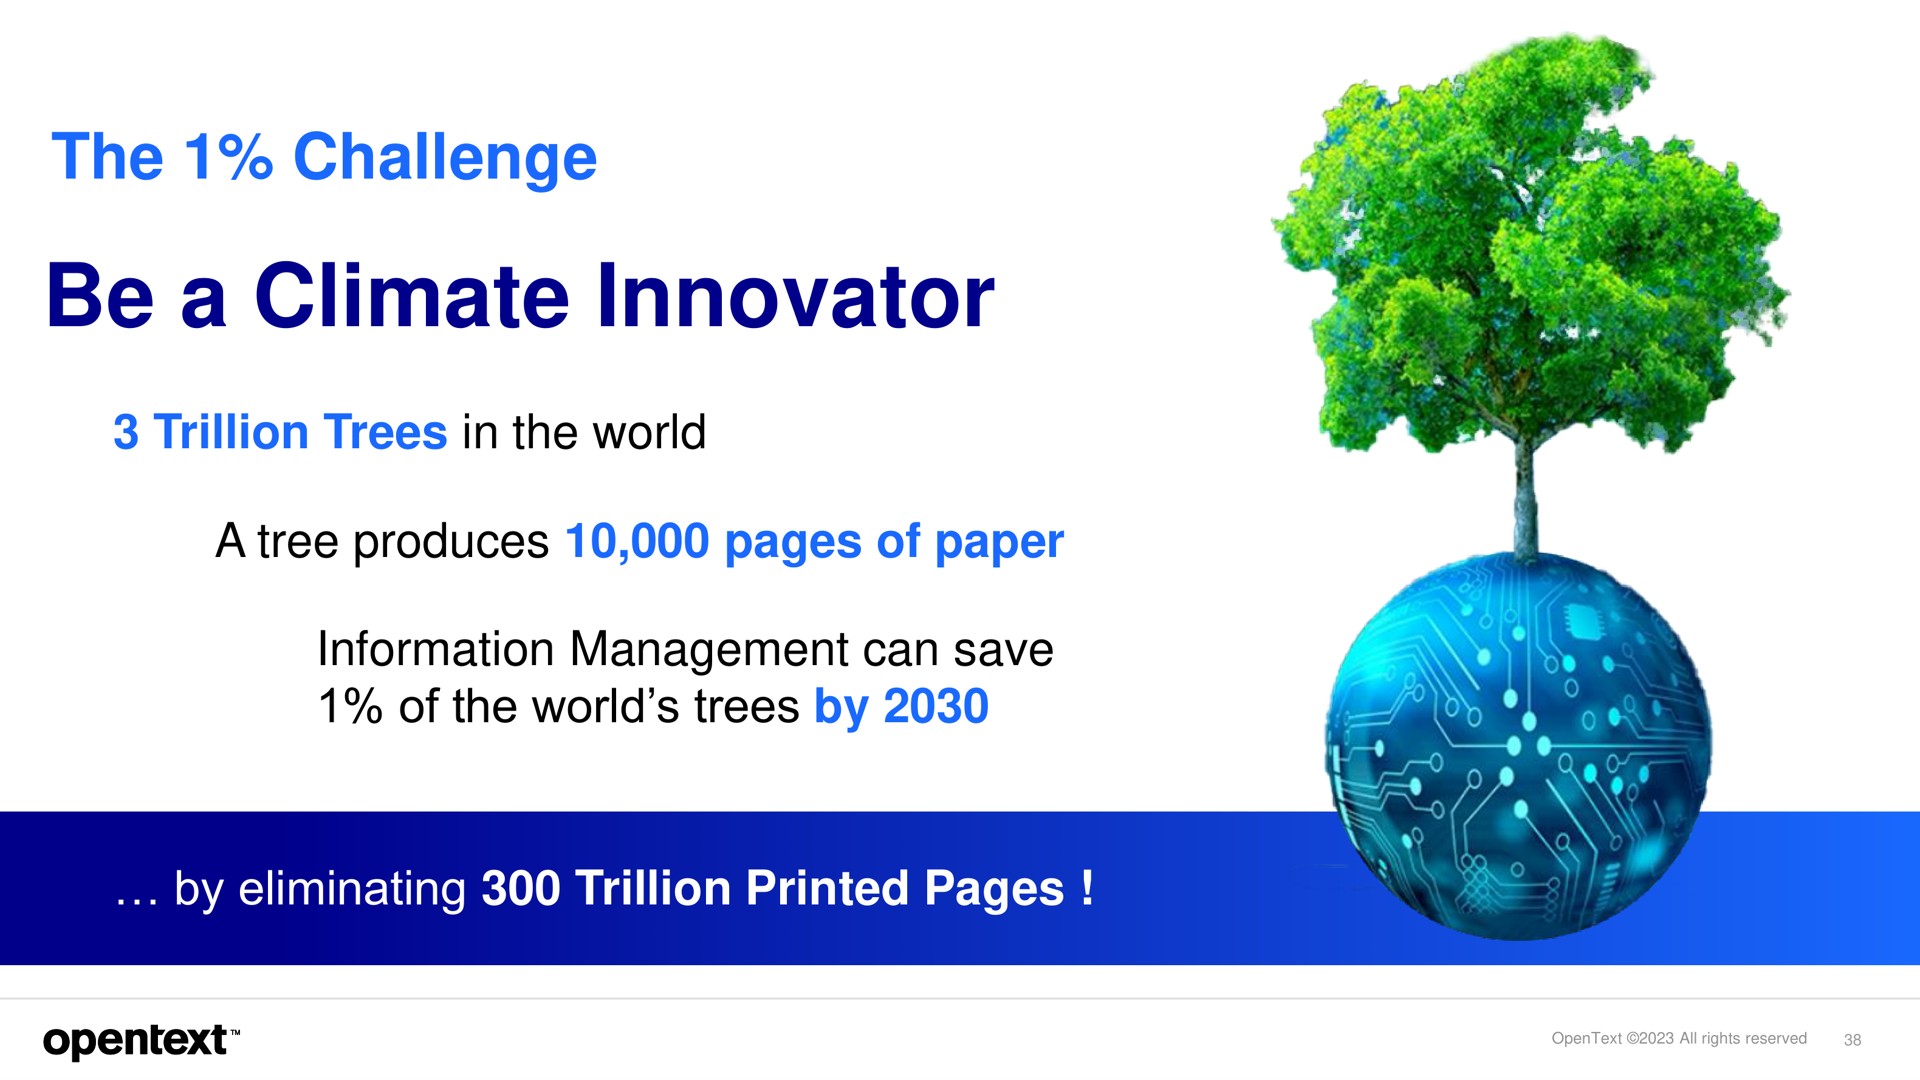 the challenge be a climate innovator trillion trees in world produces pages of paper information management can save of world trees by by eliminating trillion printed pages | OpenText